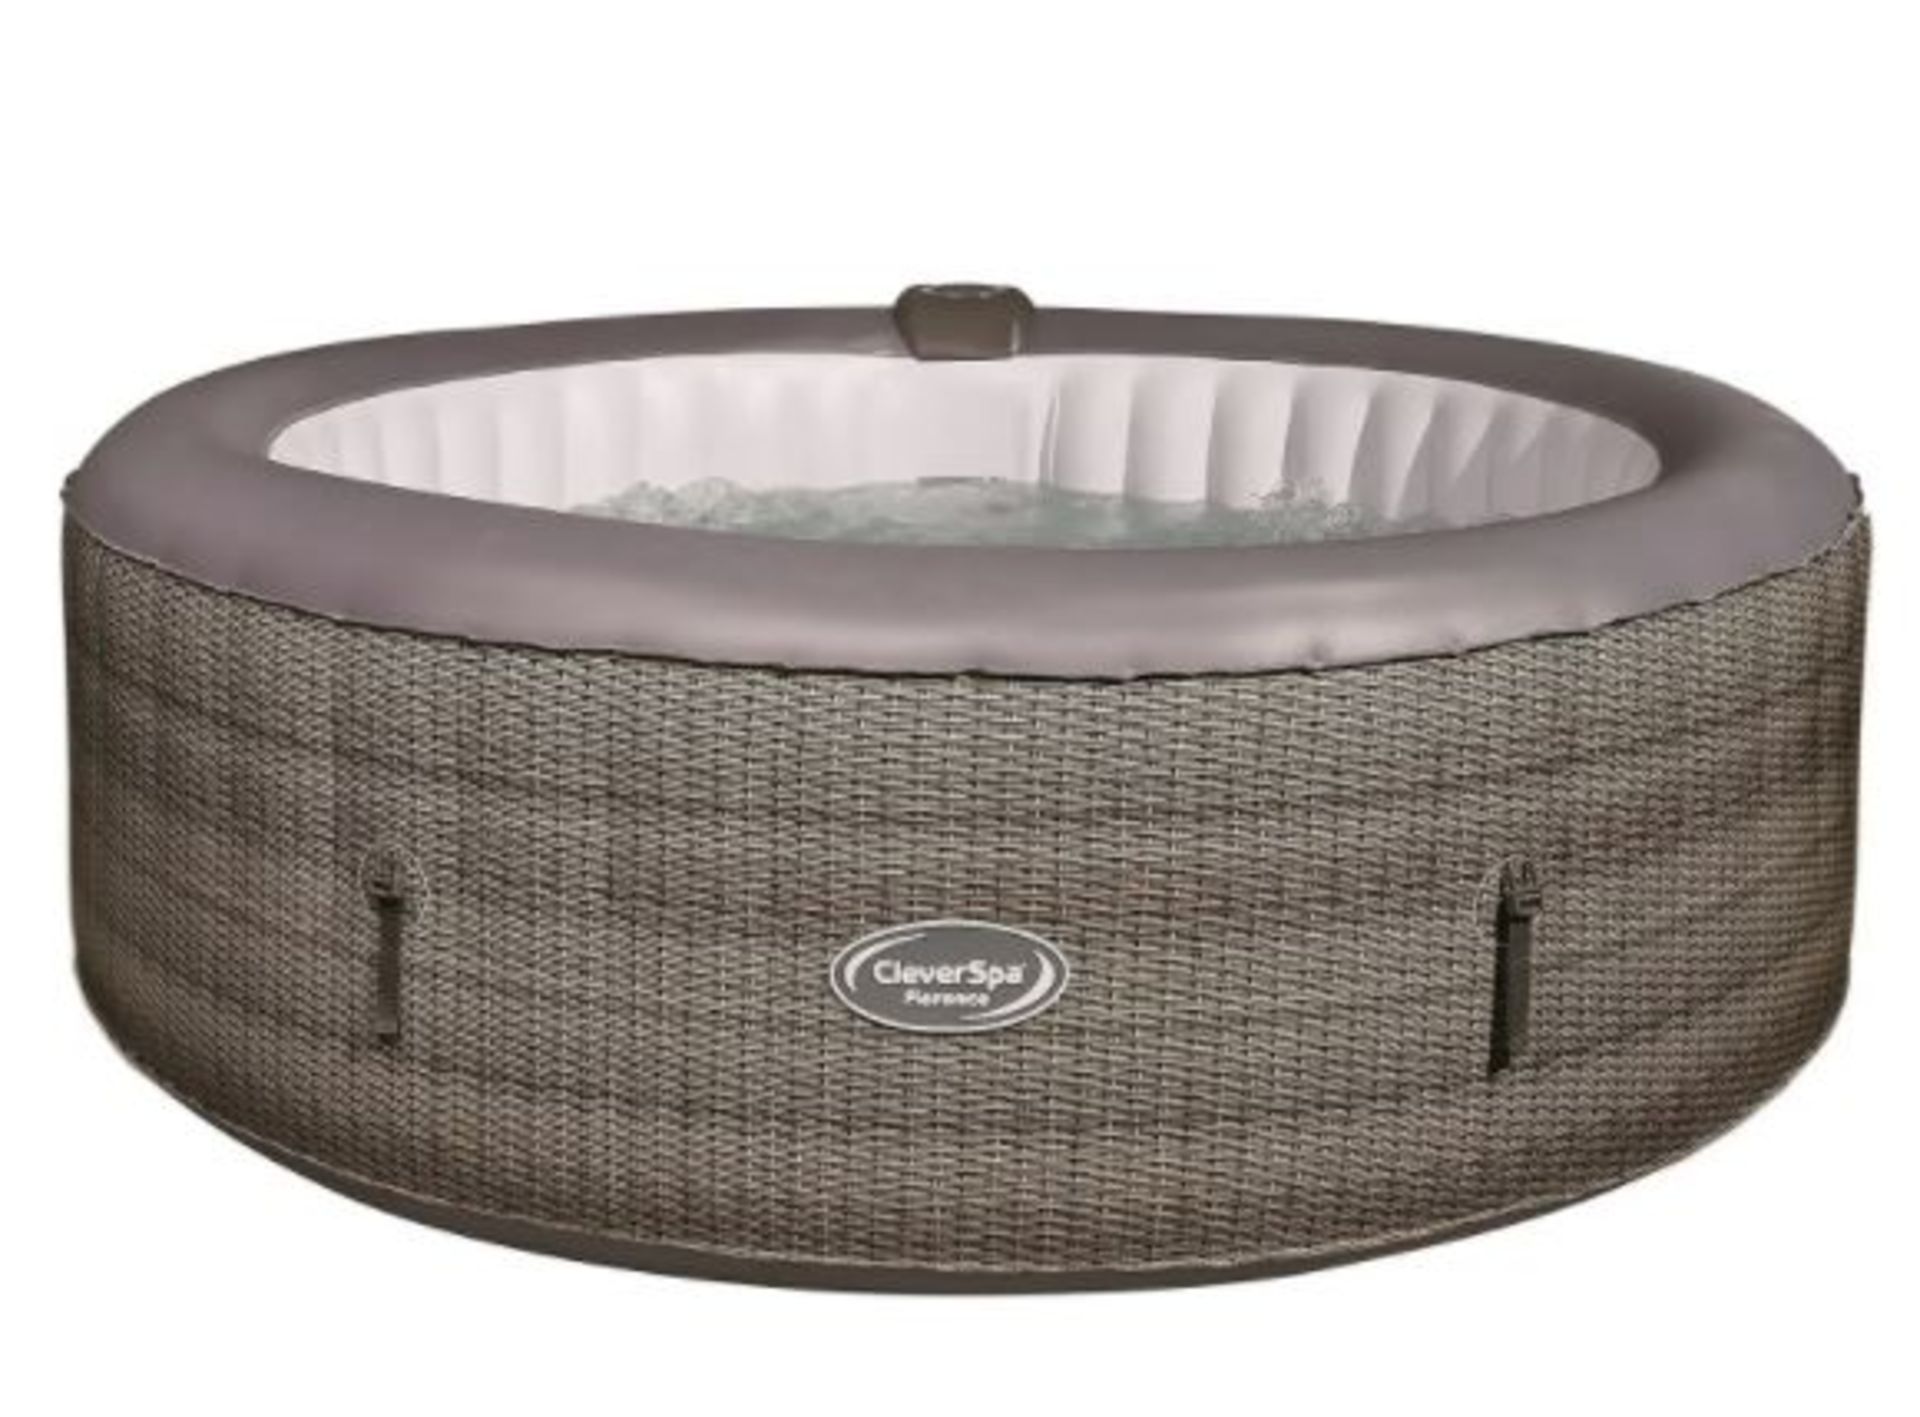 (R7J) 1x CleverSpa Florence 6 Person Hot Tub RRP £560. - Image 2 of 5